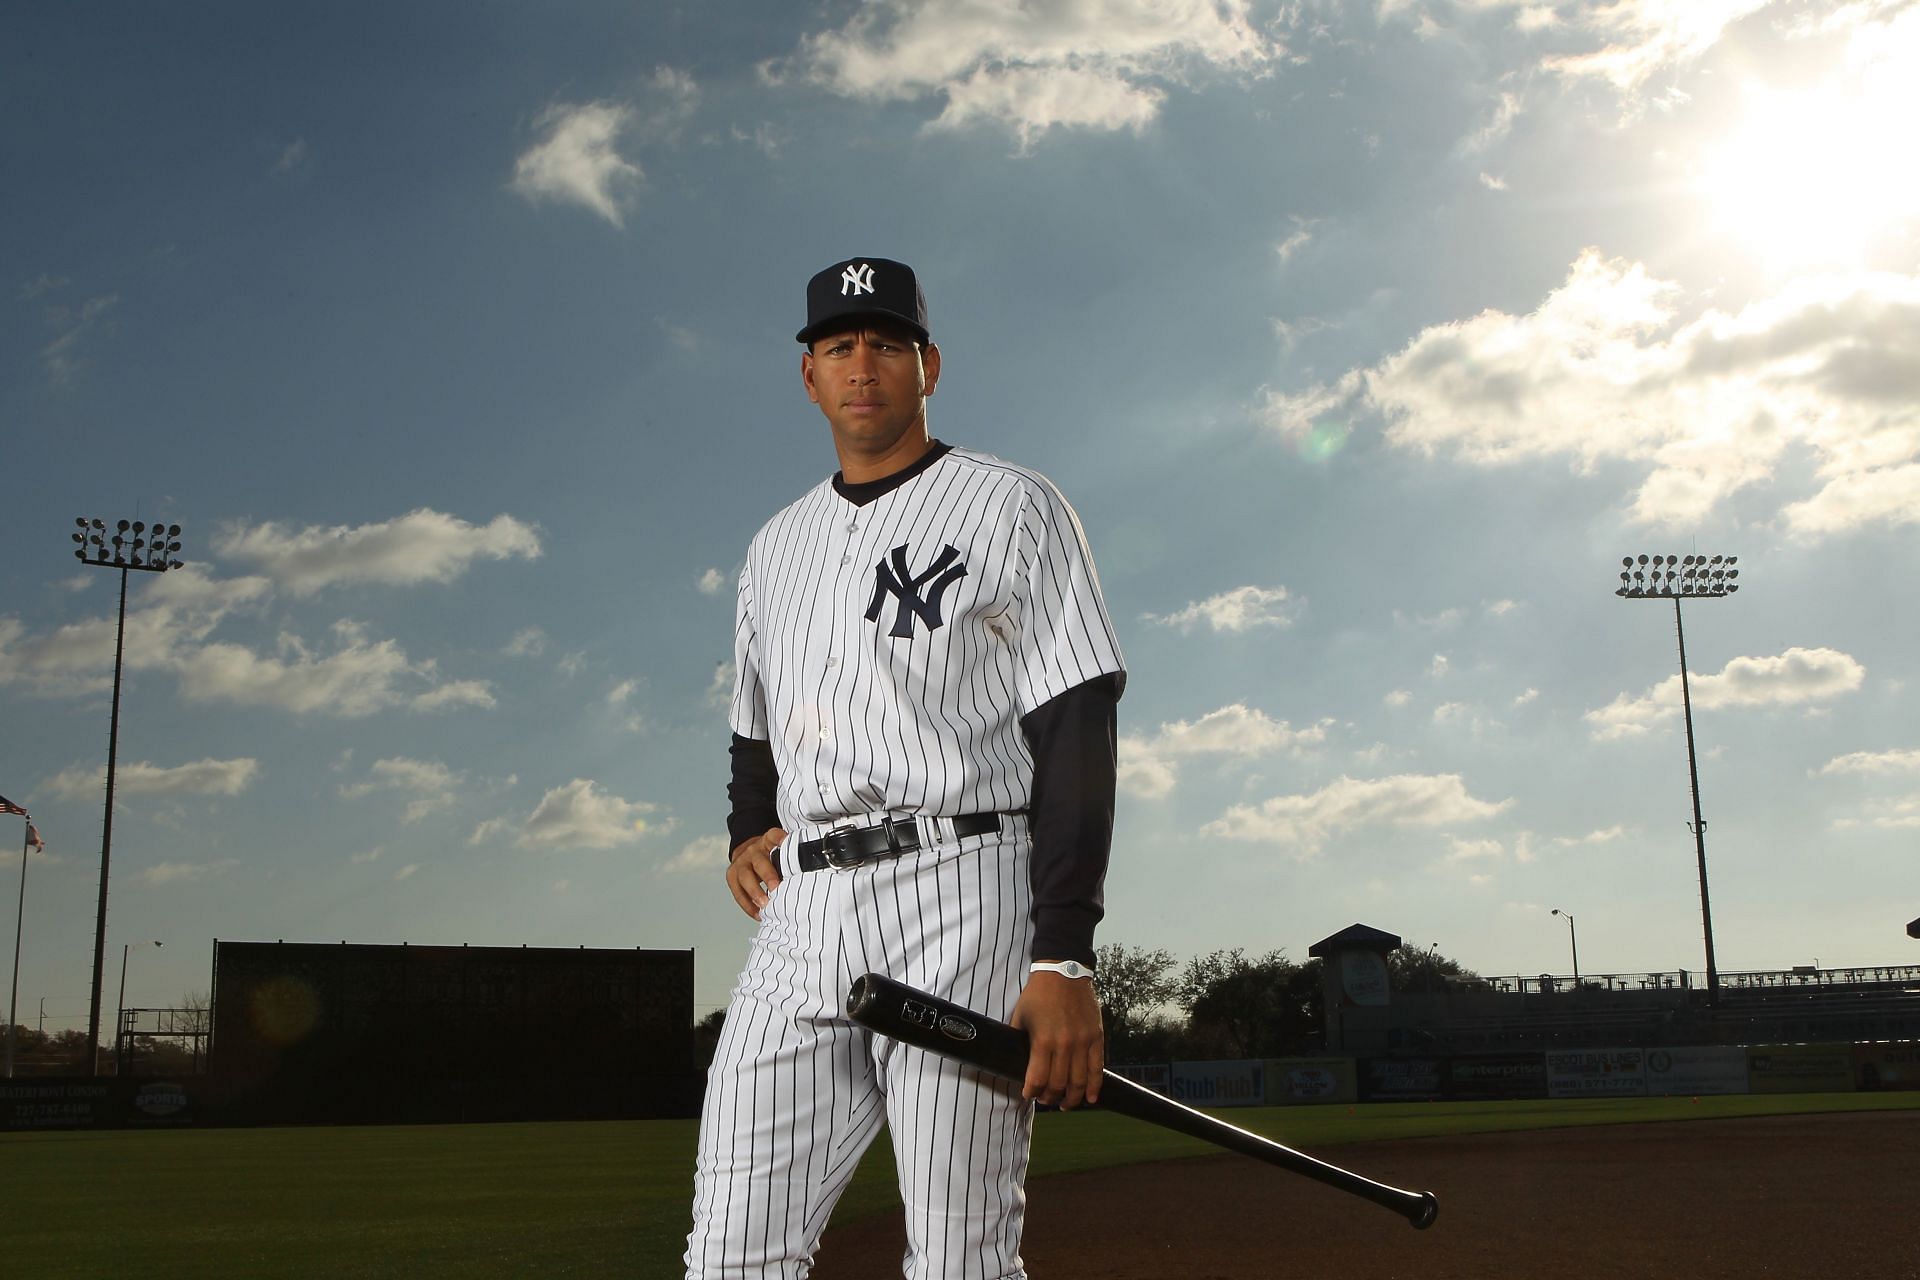 Alex Rodriguez #13 of the New York Yankees poses for a photo during Spring Training Media Photo Day at George M. Steinbrenner Field on February 25, 2010, in Tampa, Florida. (Photo by Nick Laham/Getty Images)